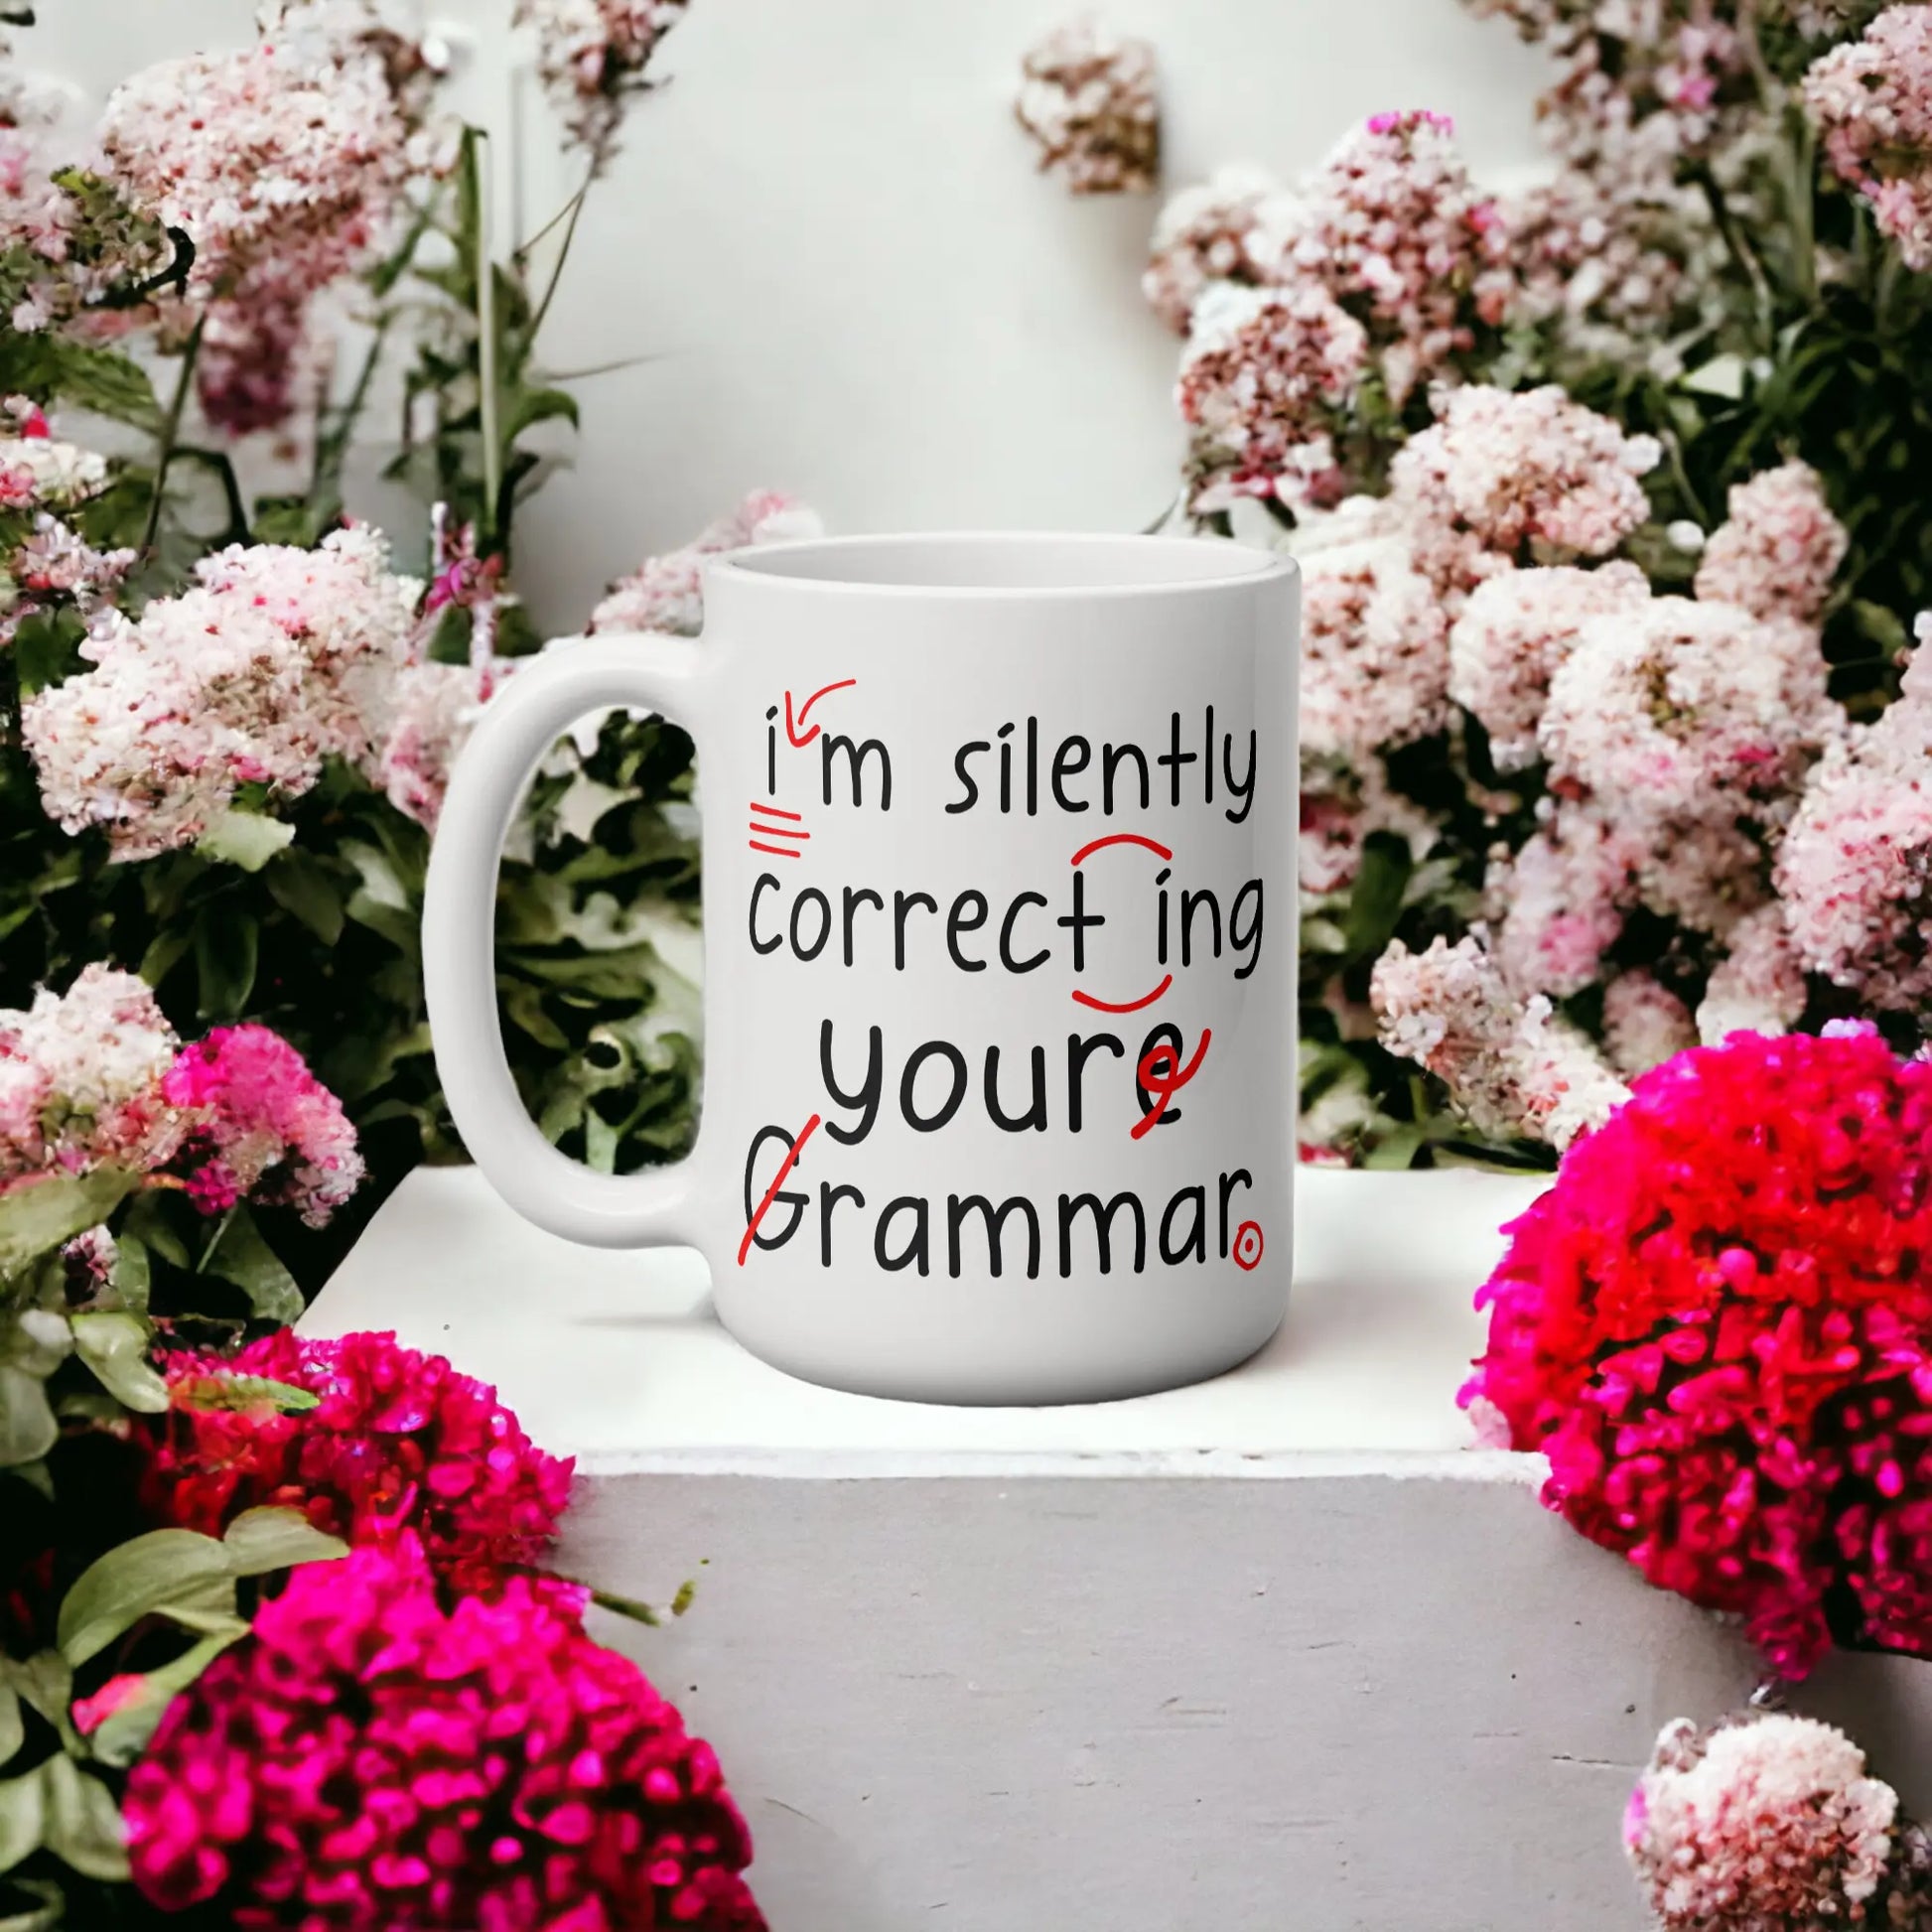  Silently Correcting Your Grammer - Funny Mug for Teachers by Free Spirit Accessories sold by Free Spirit Accessories